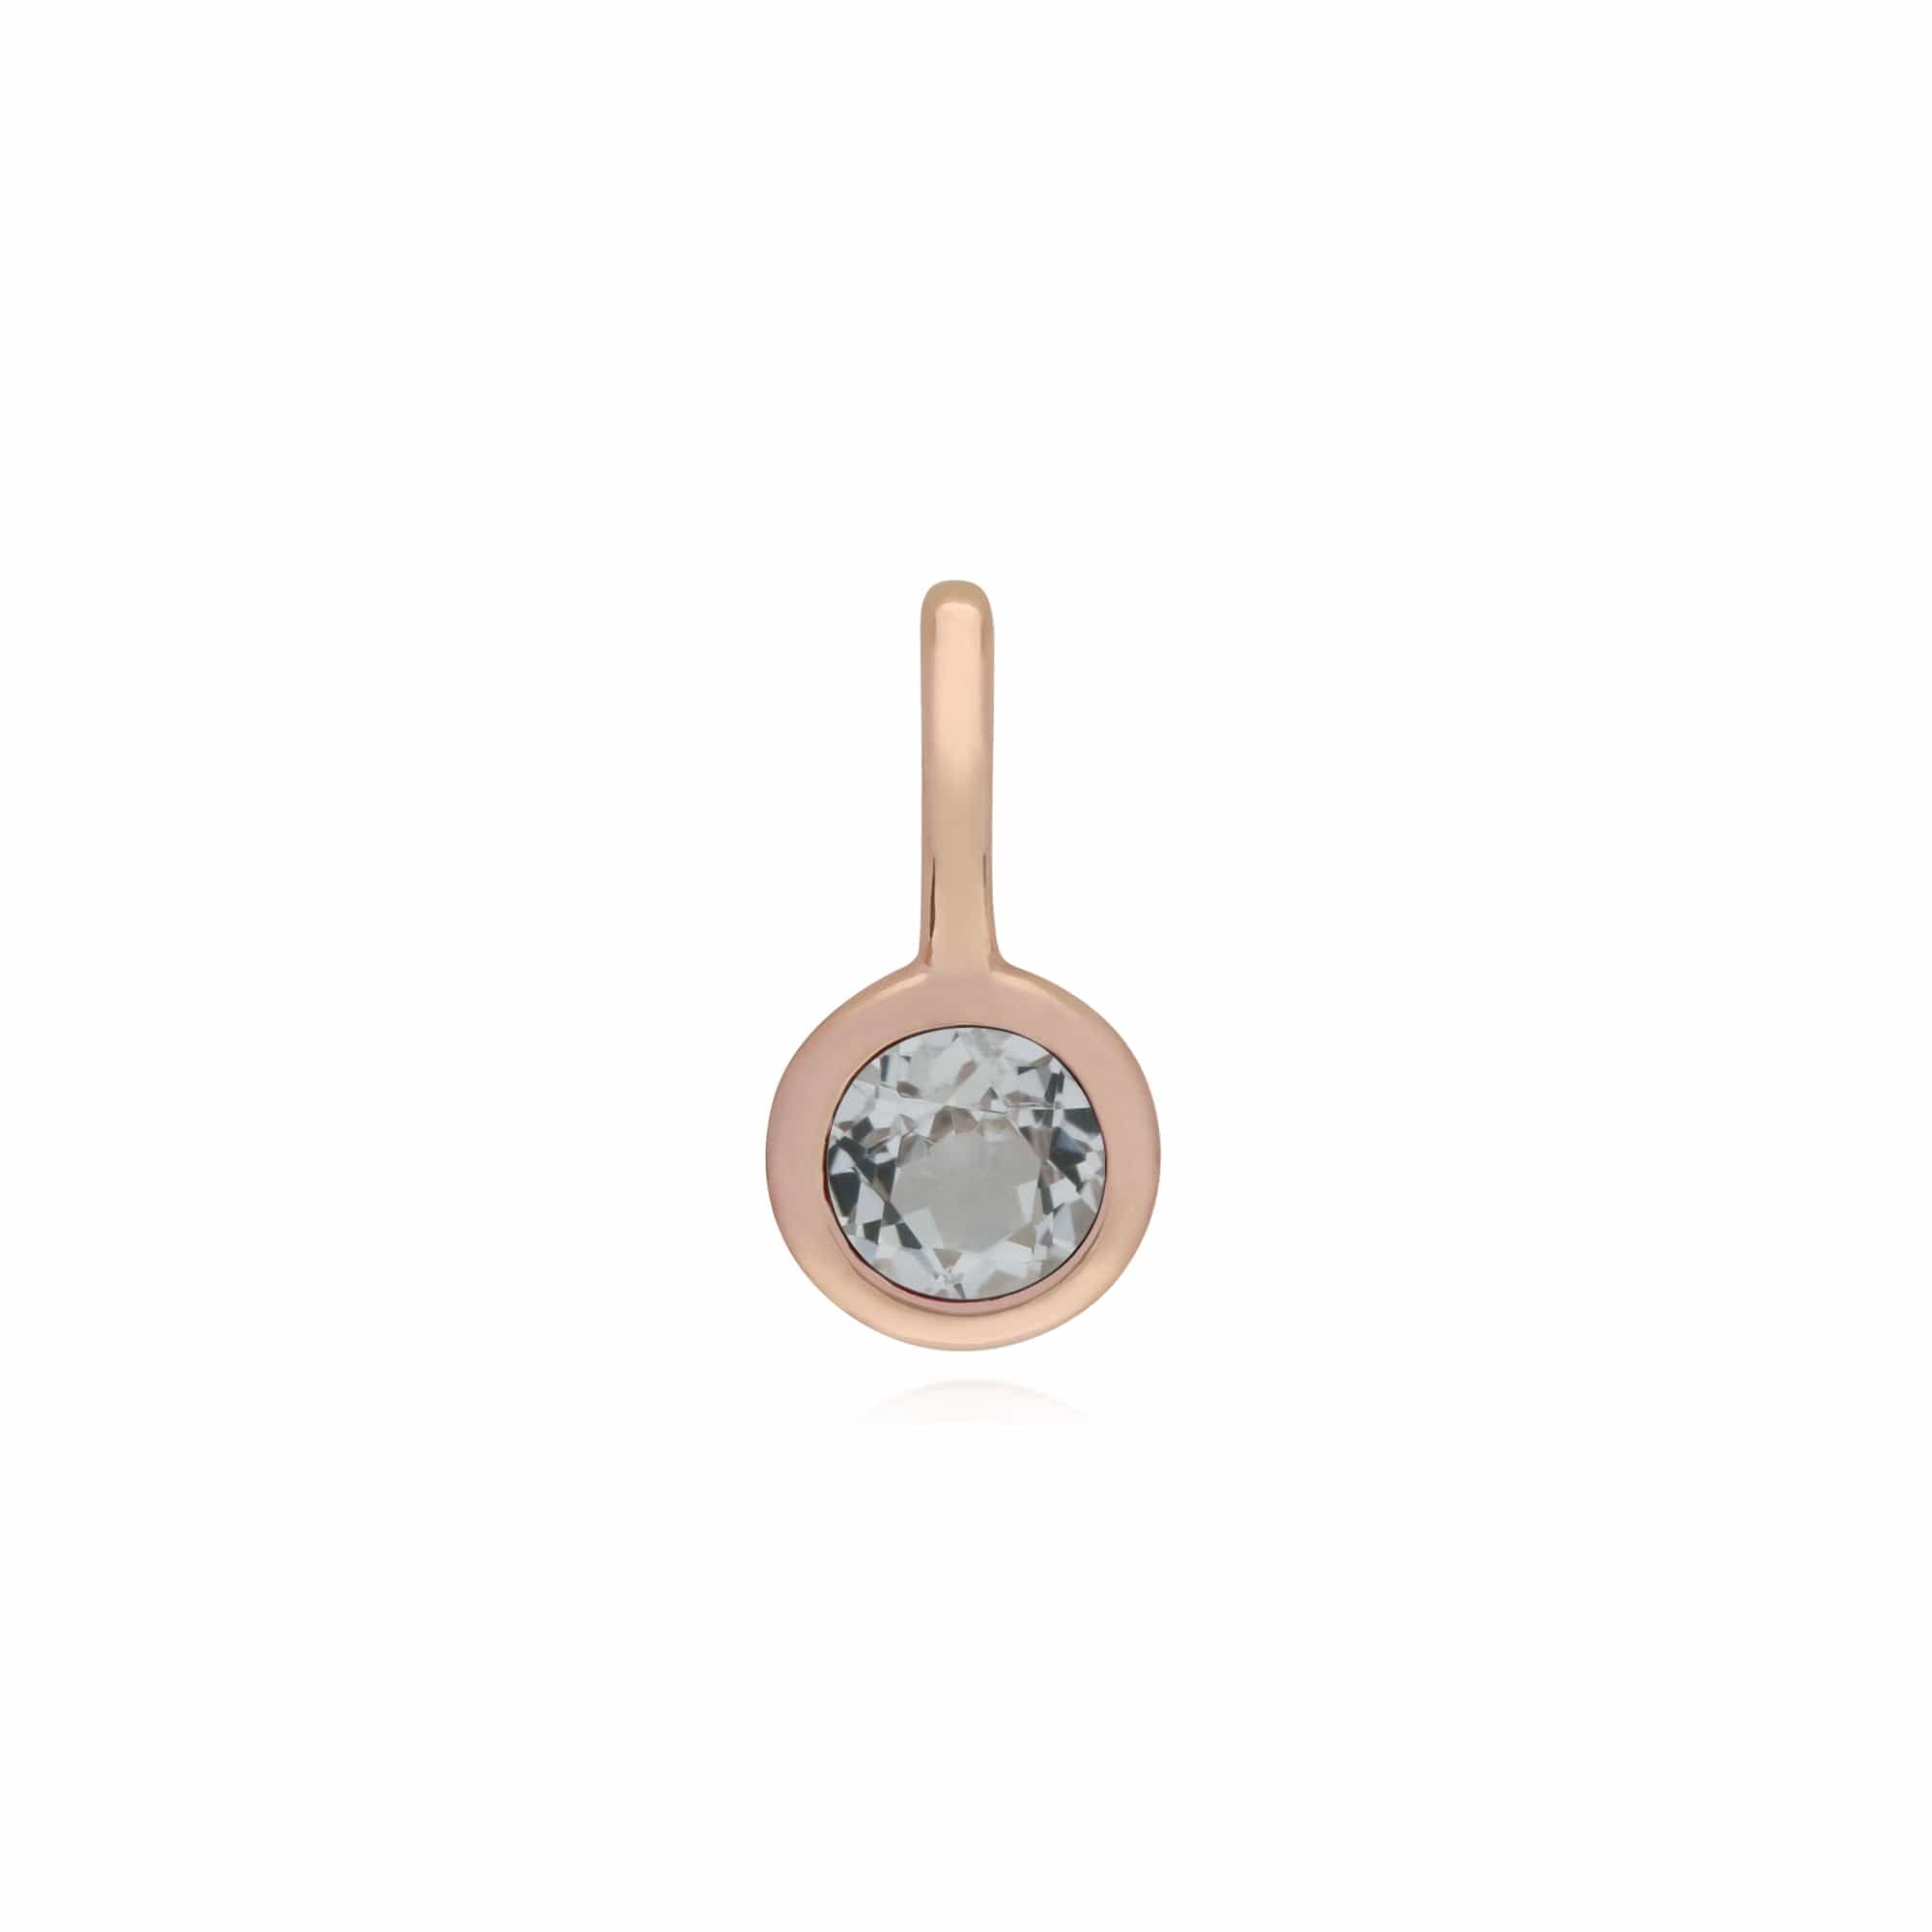 270P027308925-270P026901925 Classic Heart Lock Pendant & Clear Topaz Charm in Rose Gold Plated 925 Sterling Silver 2